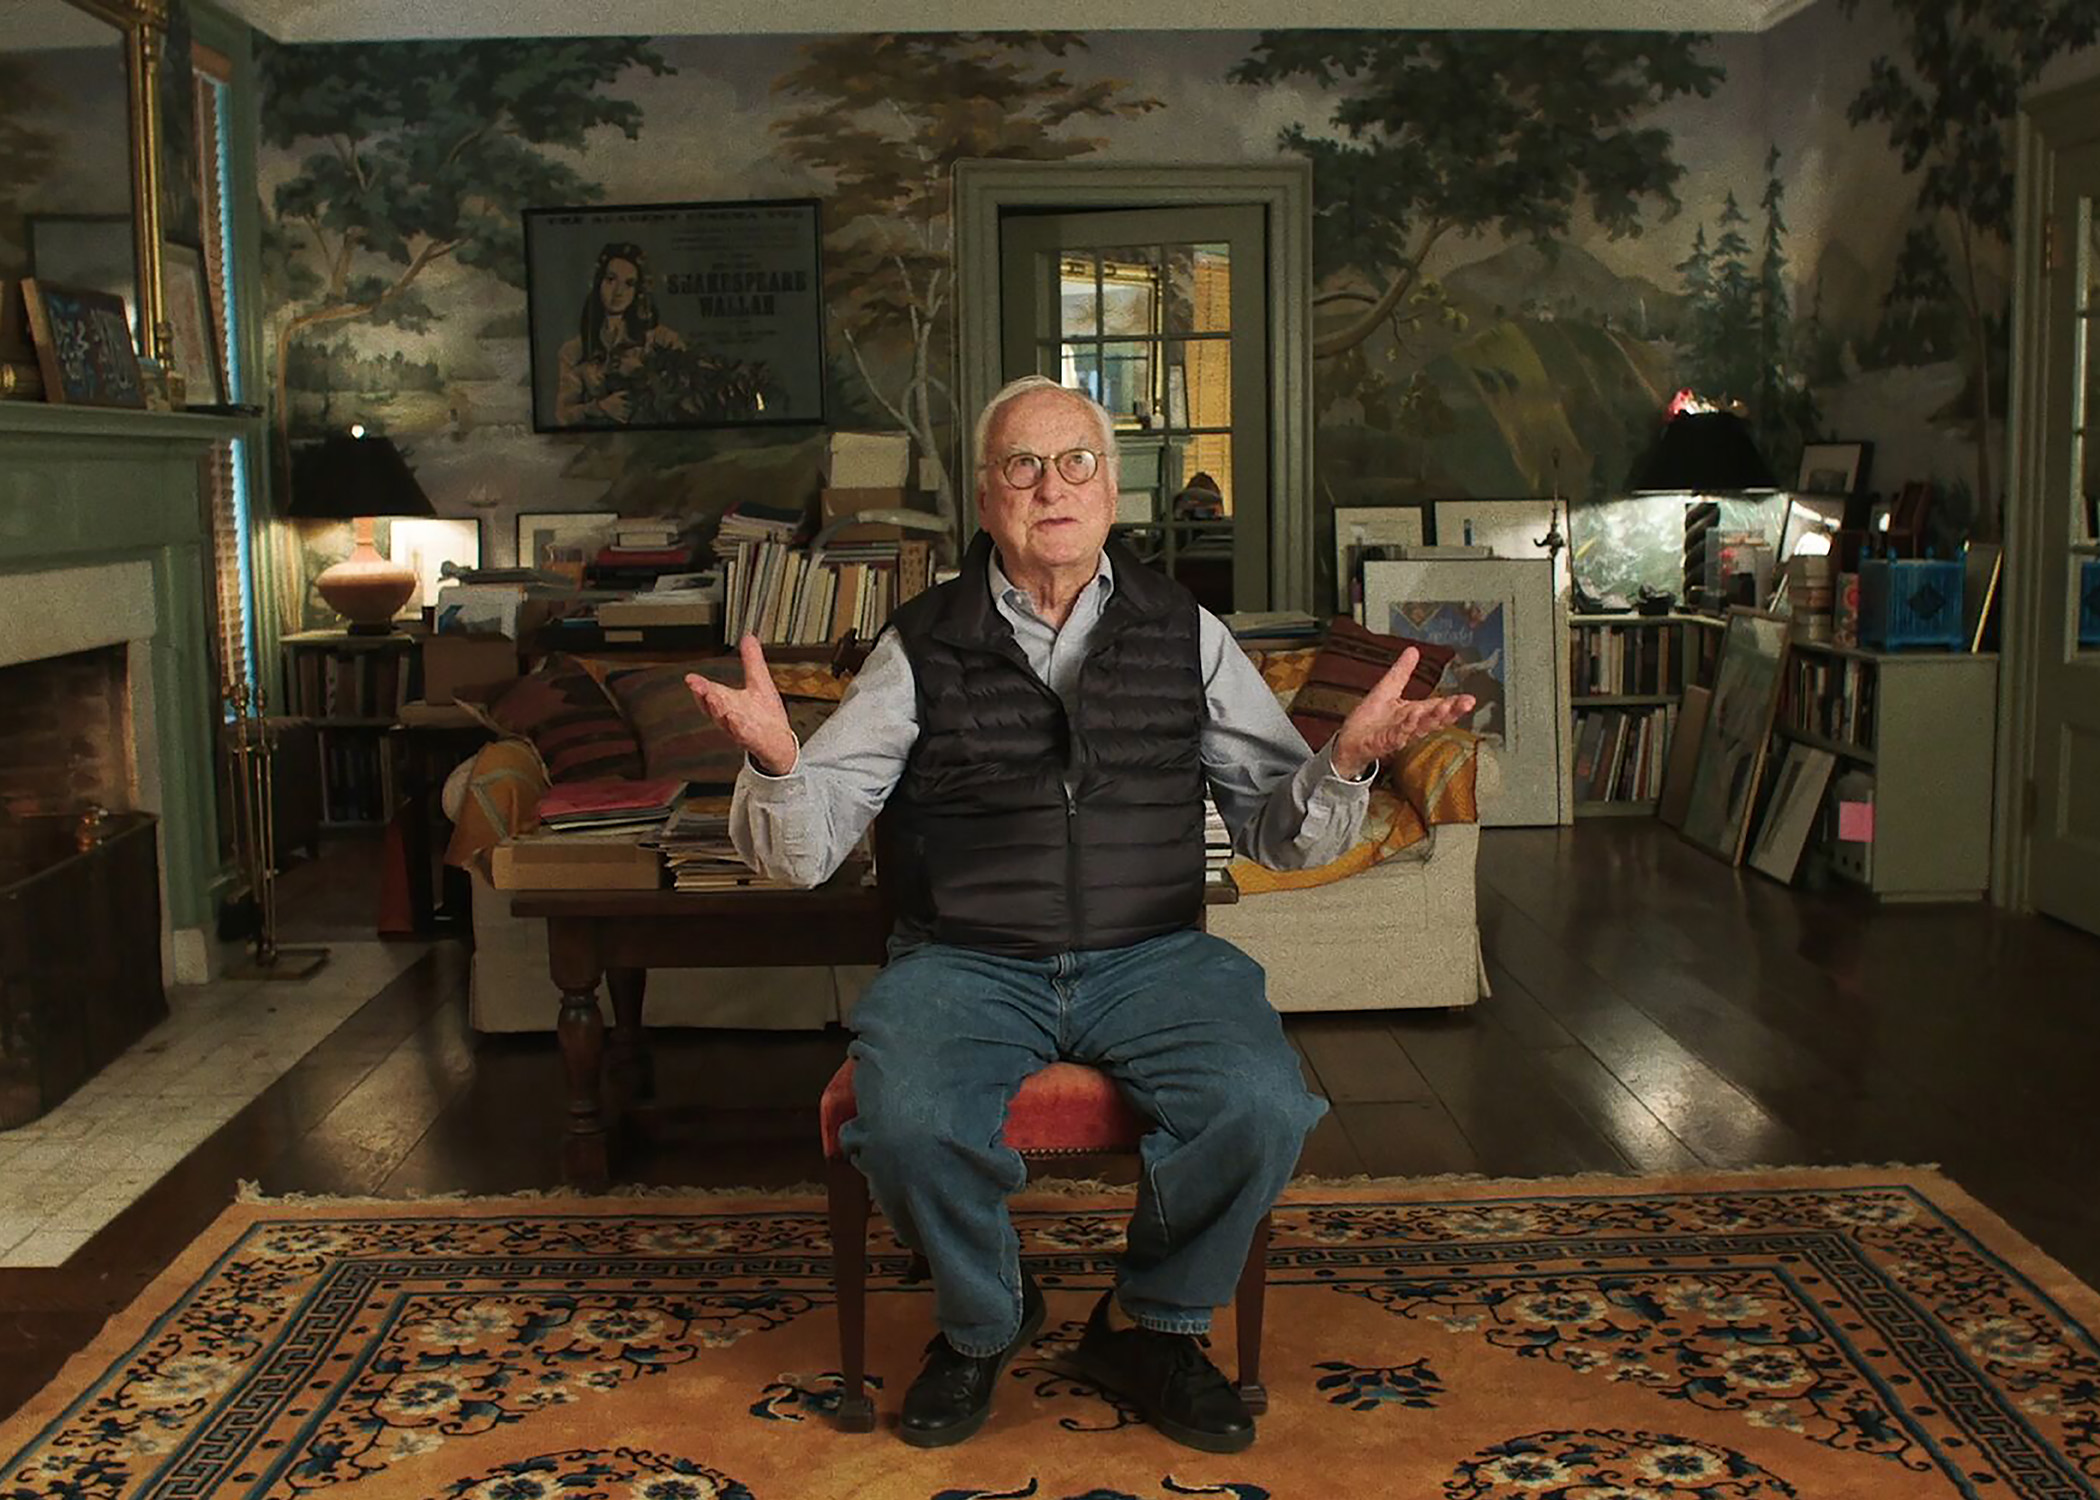 Filmmaker James Ivory gives a tour of his Hudson Valley home.